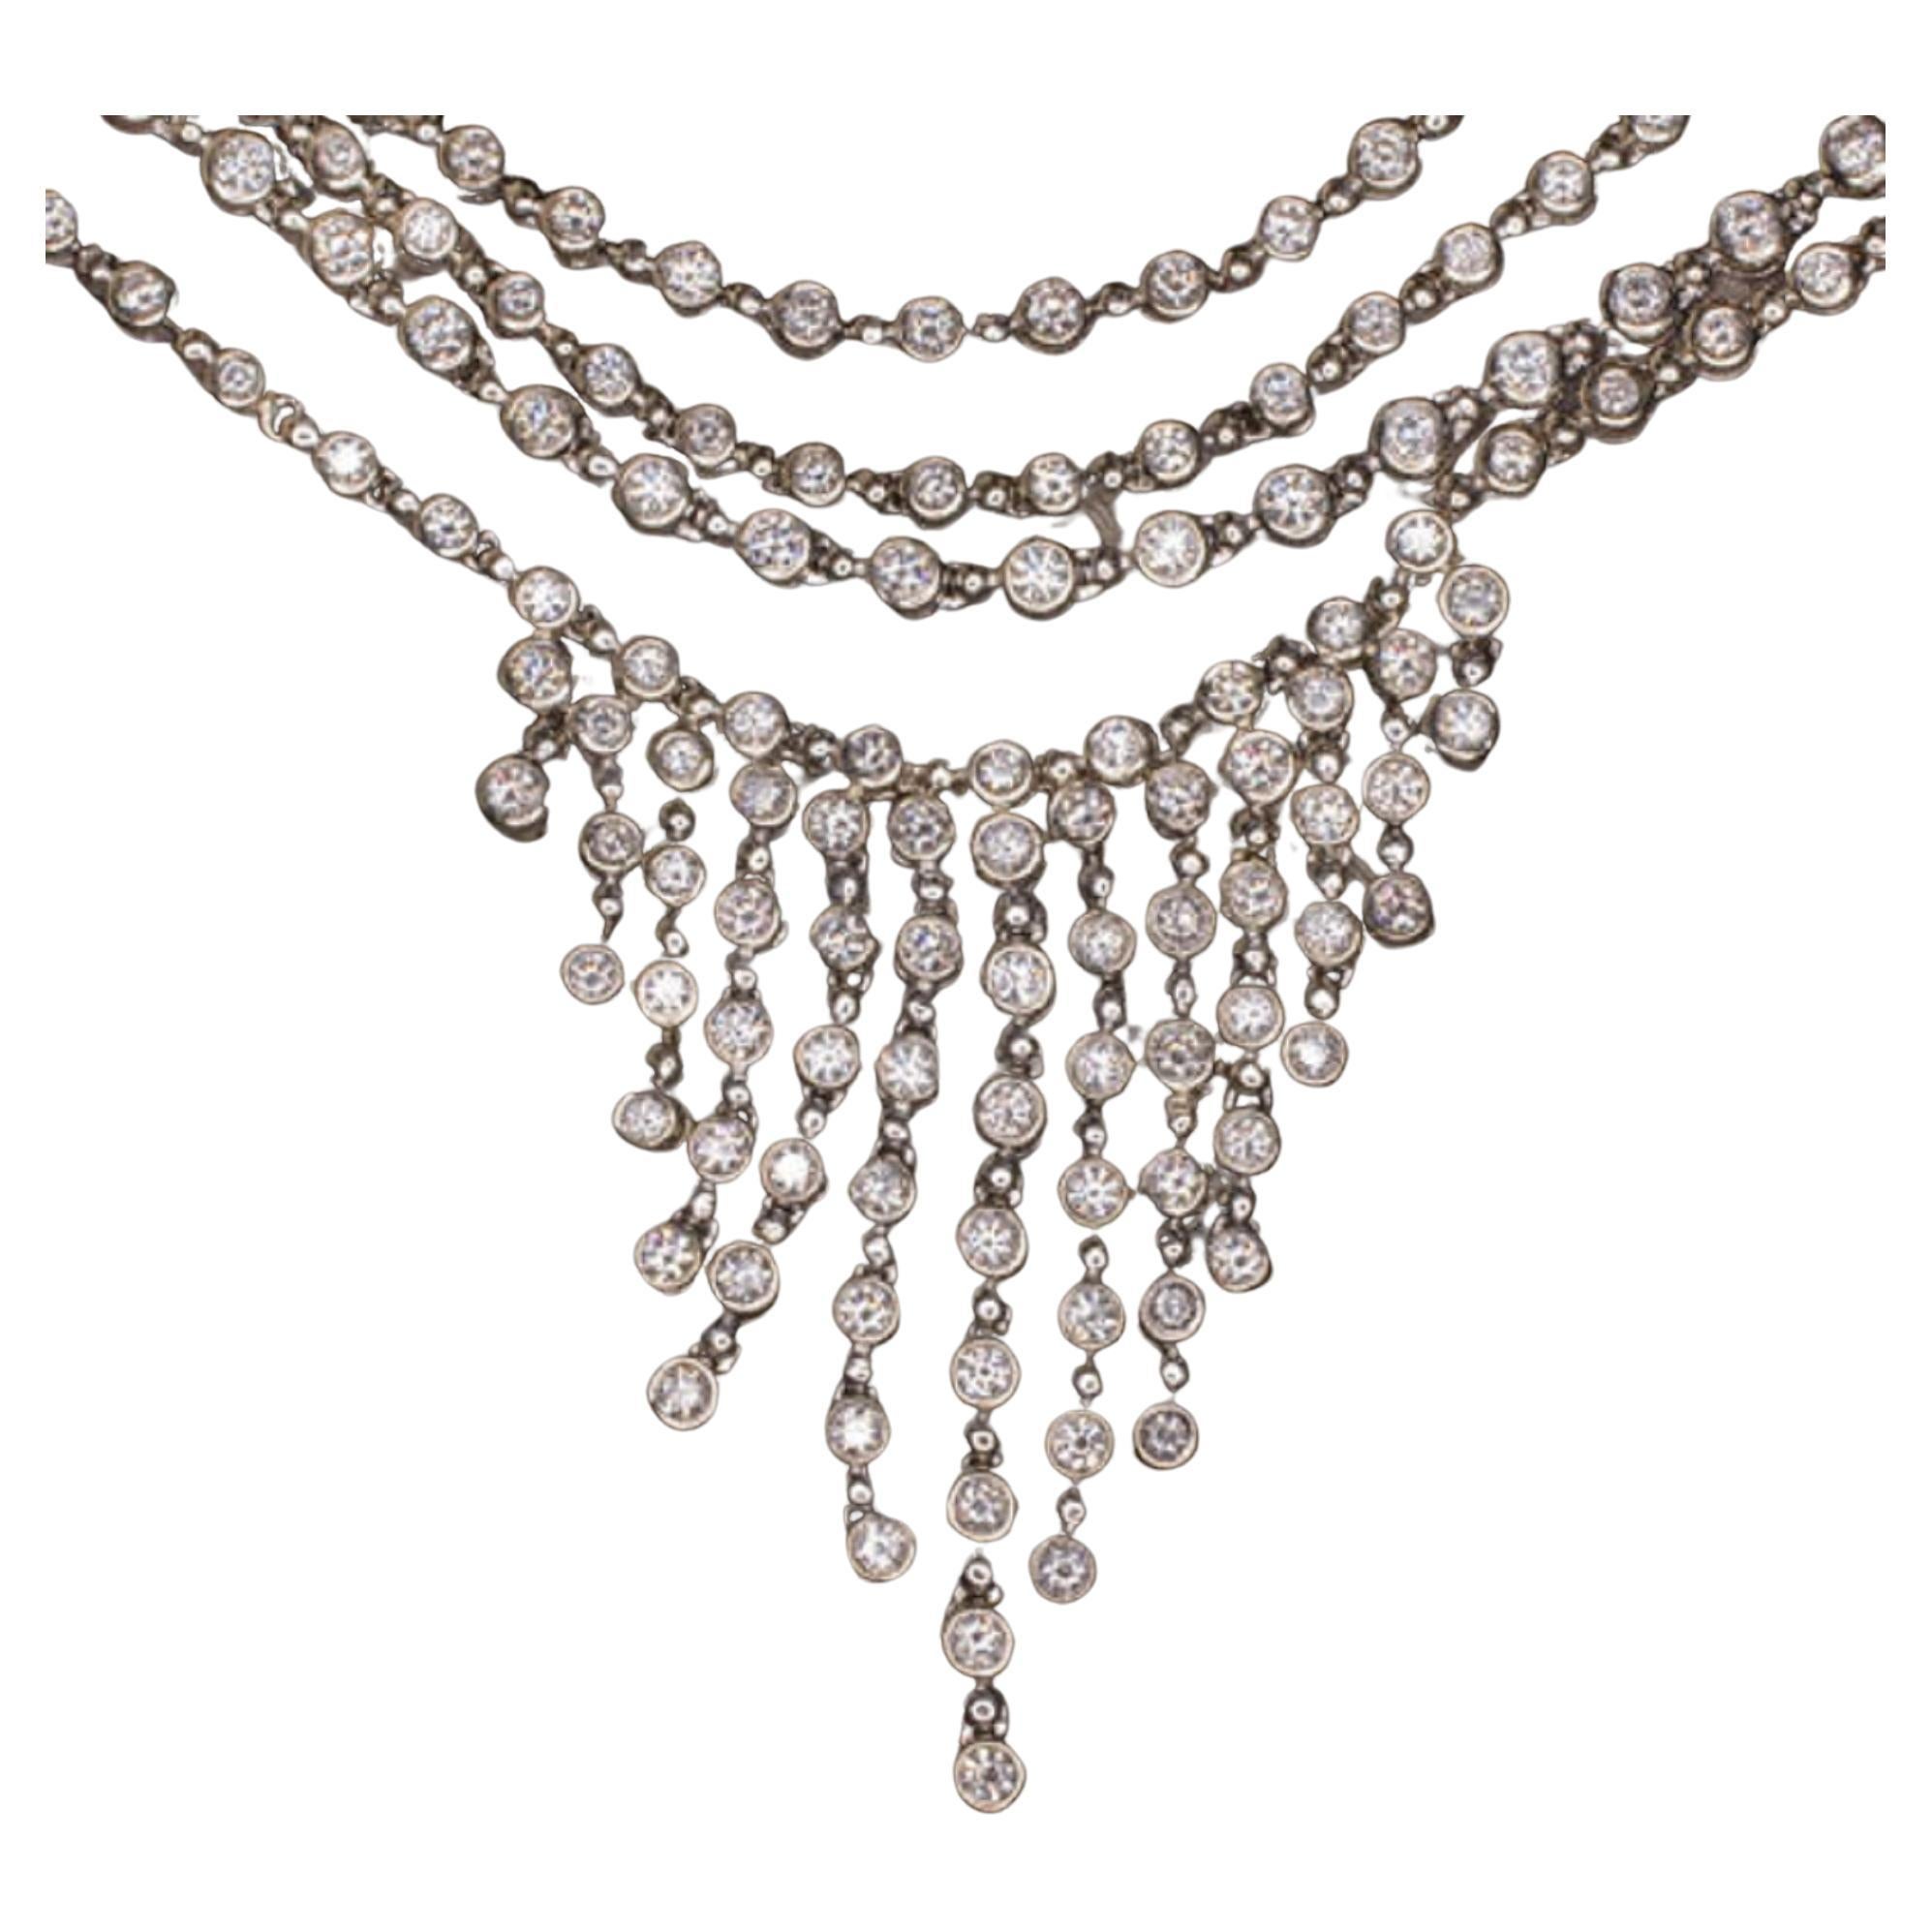 This incredible diamond necklace positively radiates elegance, class, and luxury! Four strands and 19.20 carats of brilliantly white natural diamonds form a shimmering stream which cascades gracefully into an exquisite diamond tassel. The tassel has